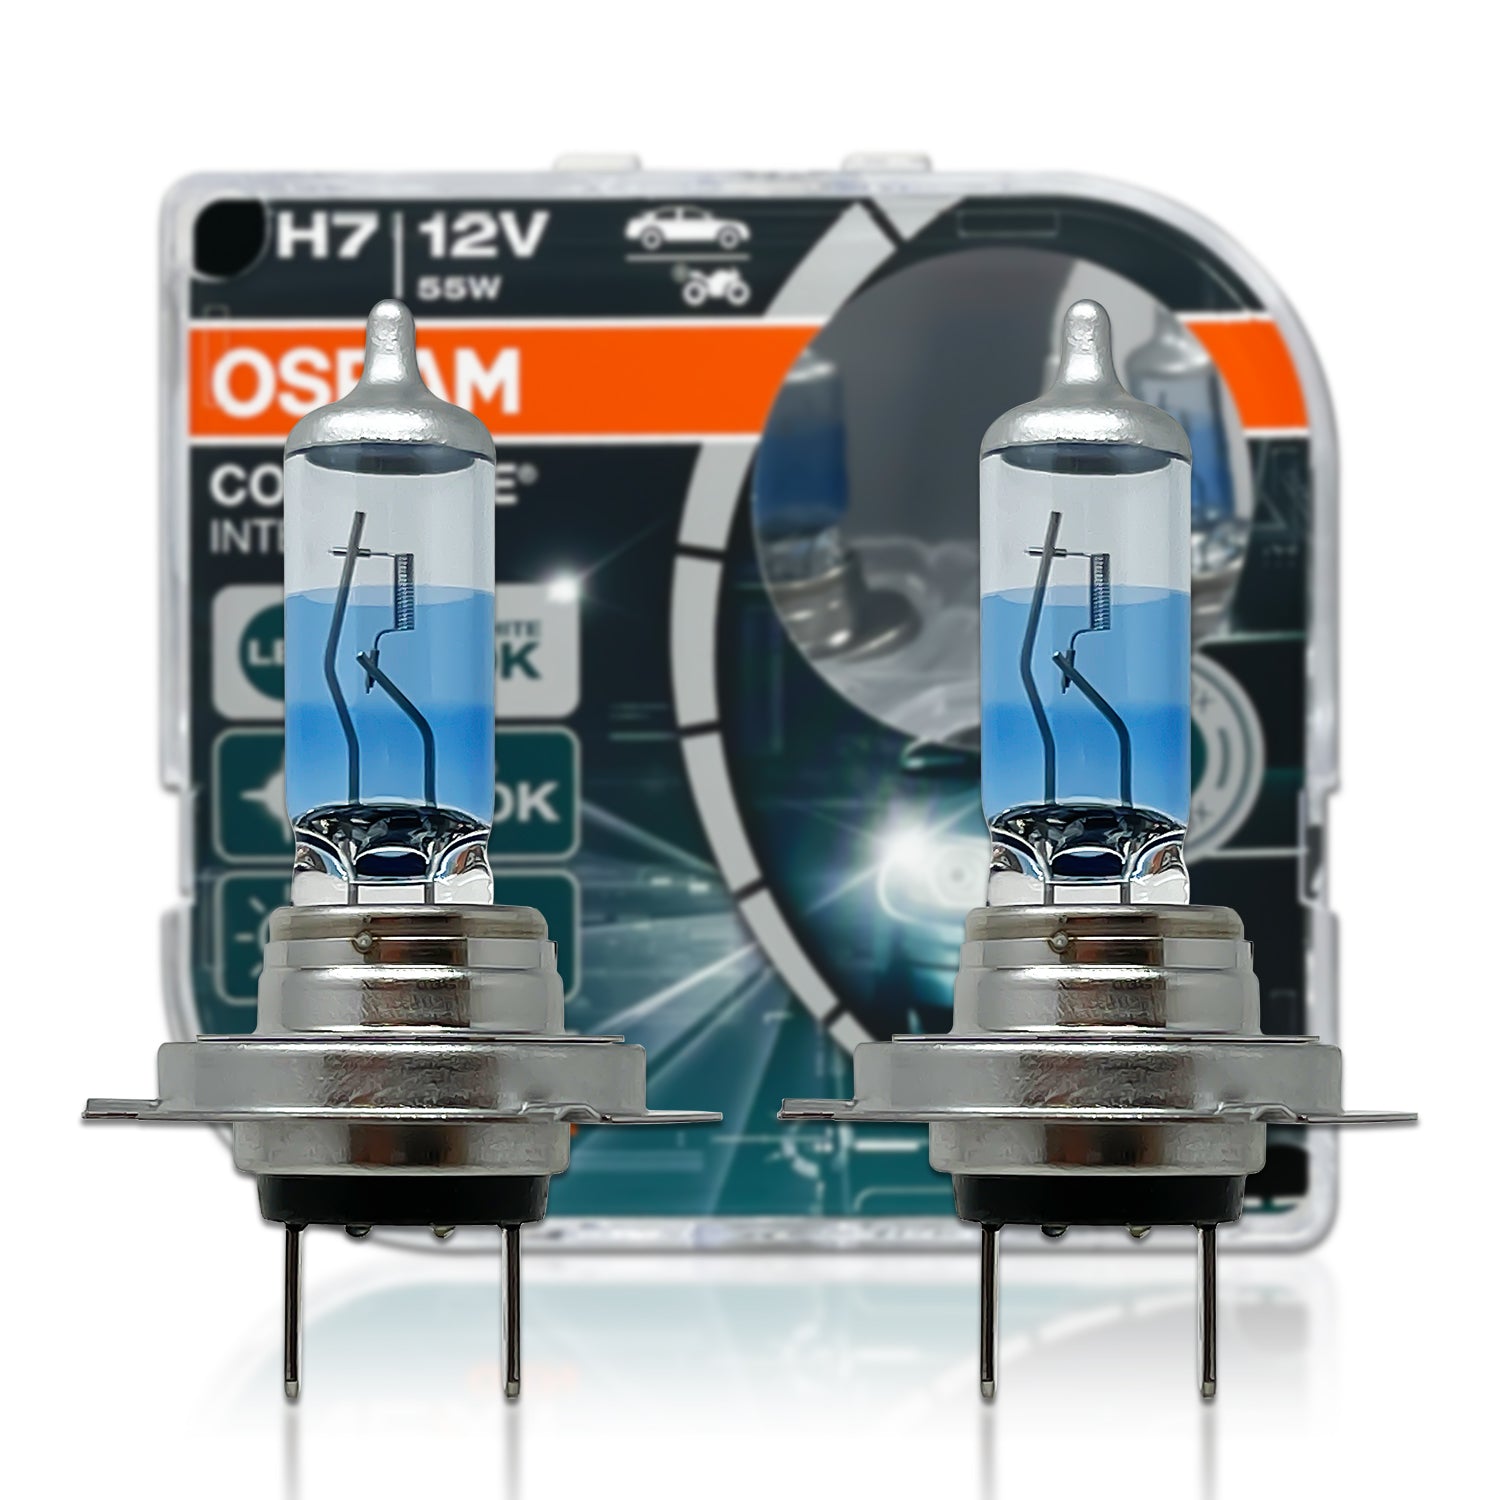 Osram Cool Blue INTENSE H7 12V 55W (64210CBN) Duo desde 18,63 €